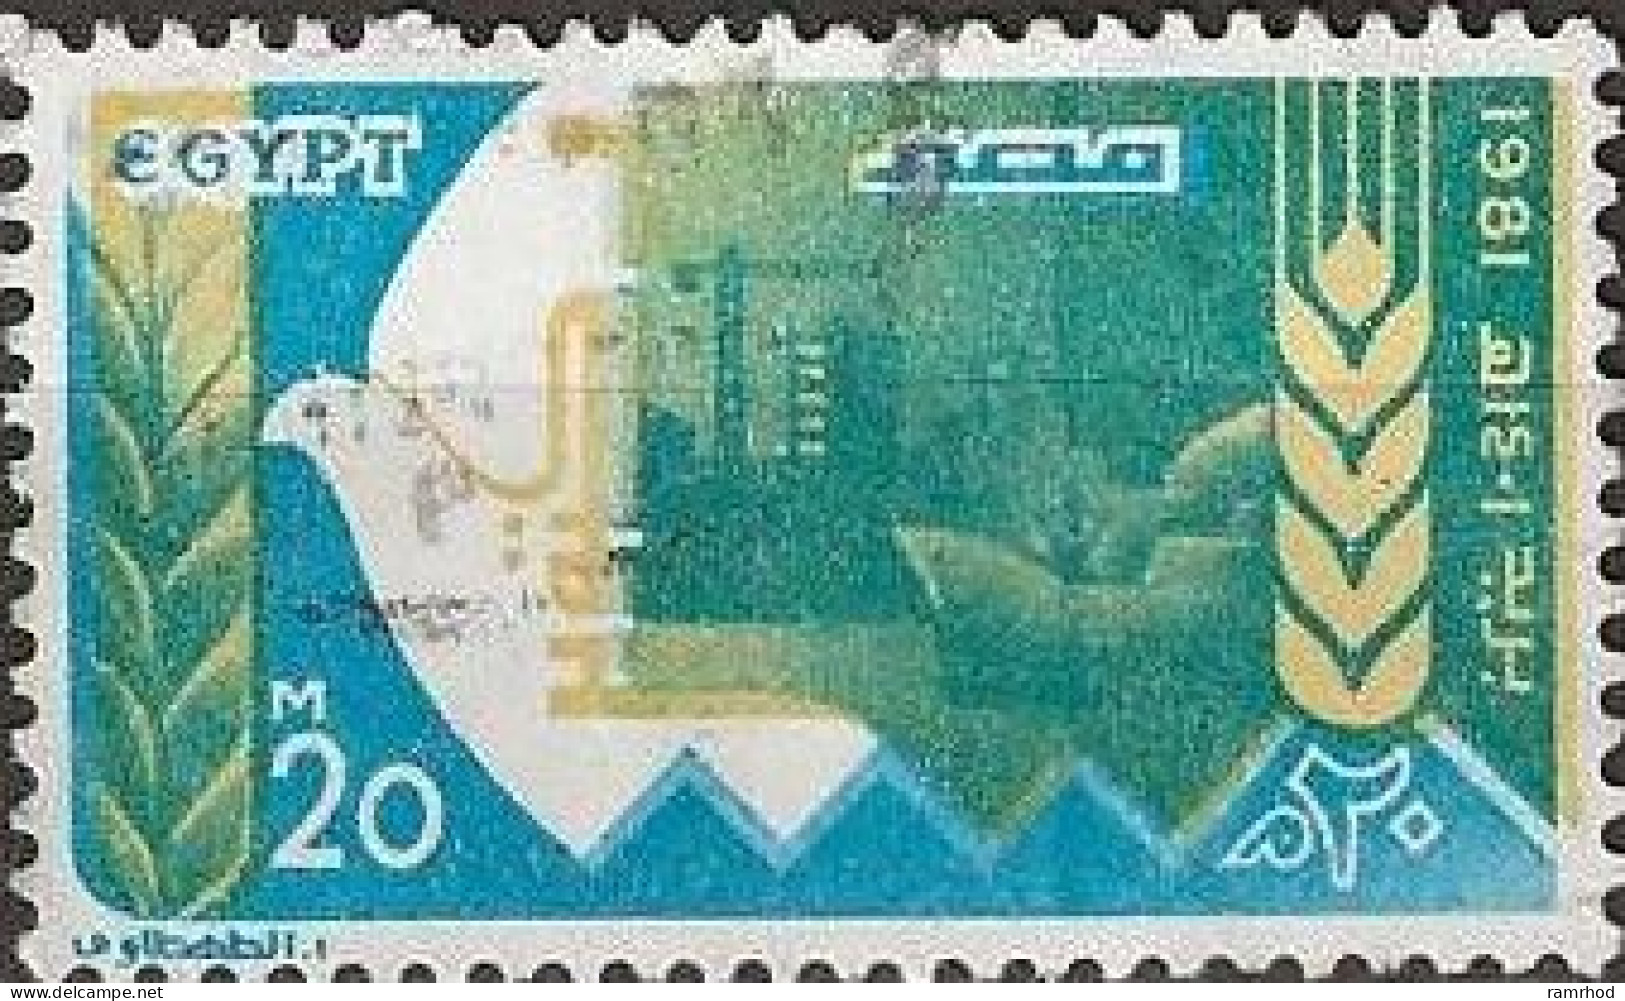 EGYPT 1981 Eighth Anniversary Of Suez Crossing - 20m - Olive, Dove, Canal And Wheat FU - Usados